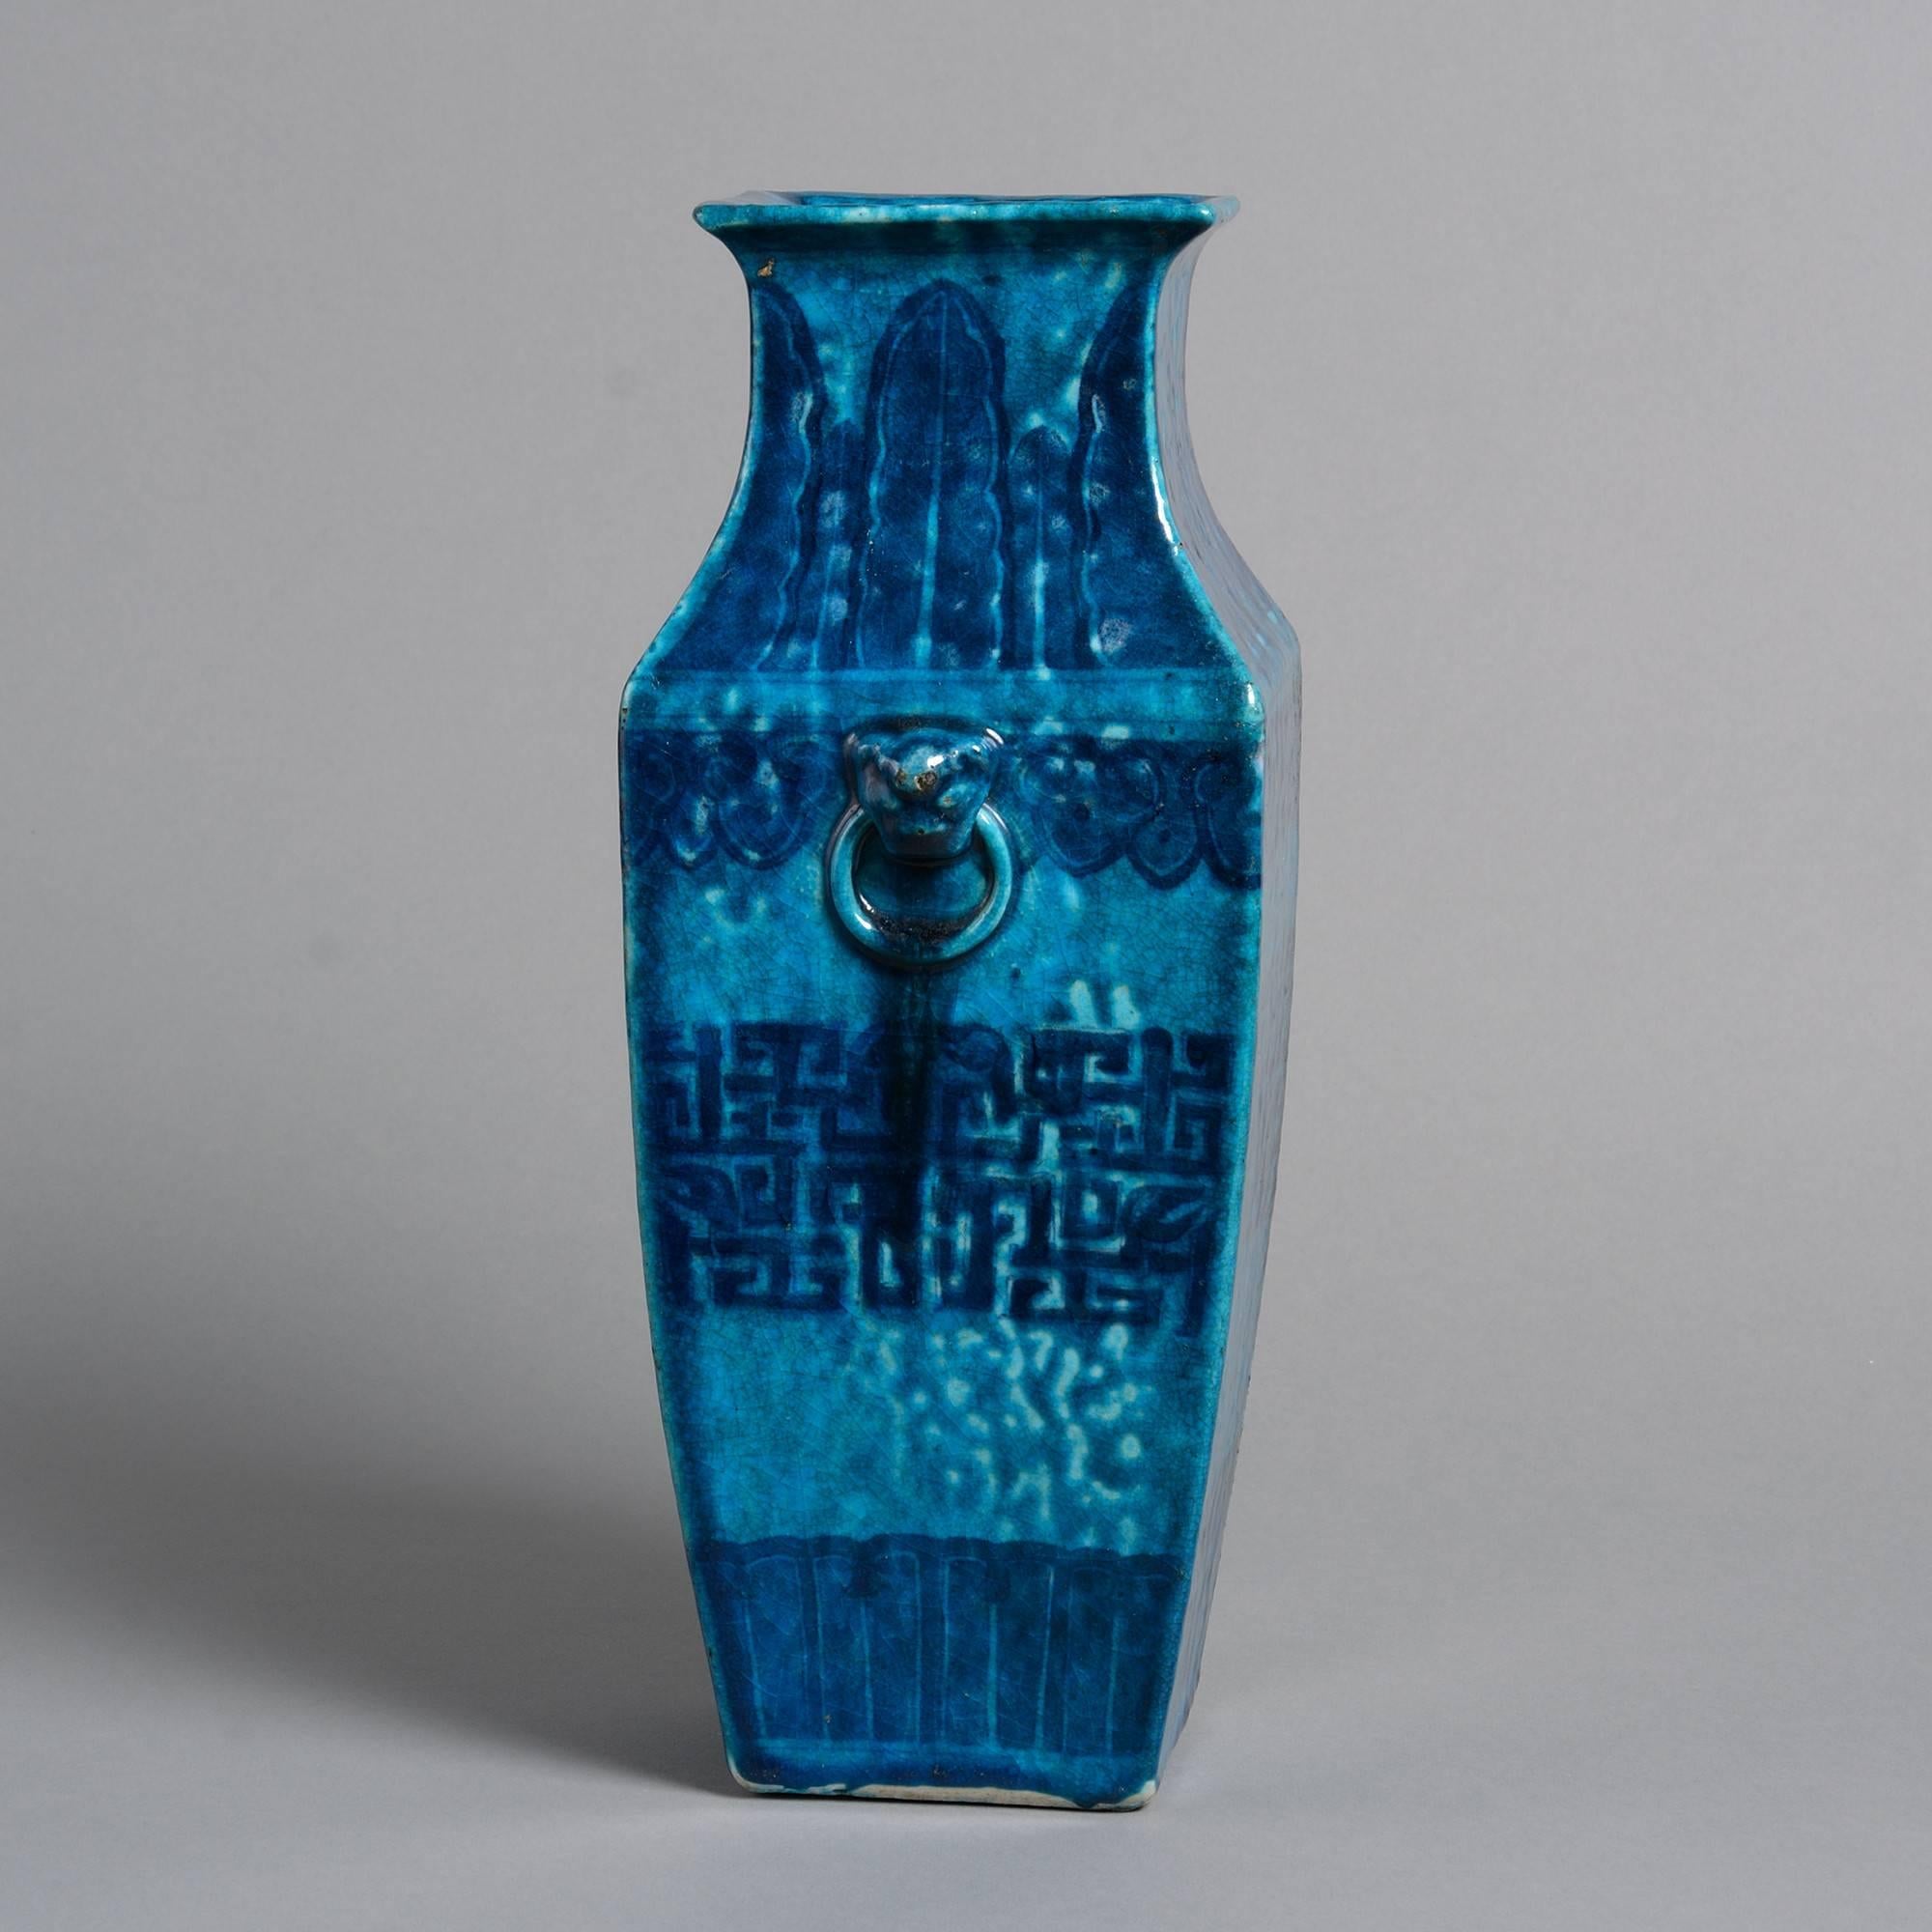 A mid-19th century vase of square tapering form with lotus leaf and geometric decoration on a turquoise ground.